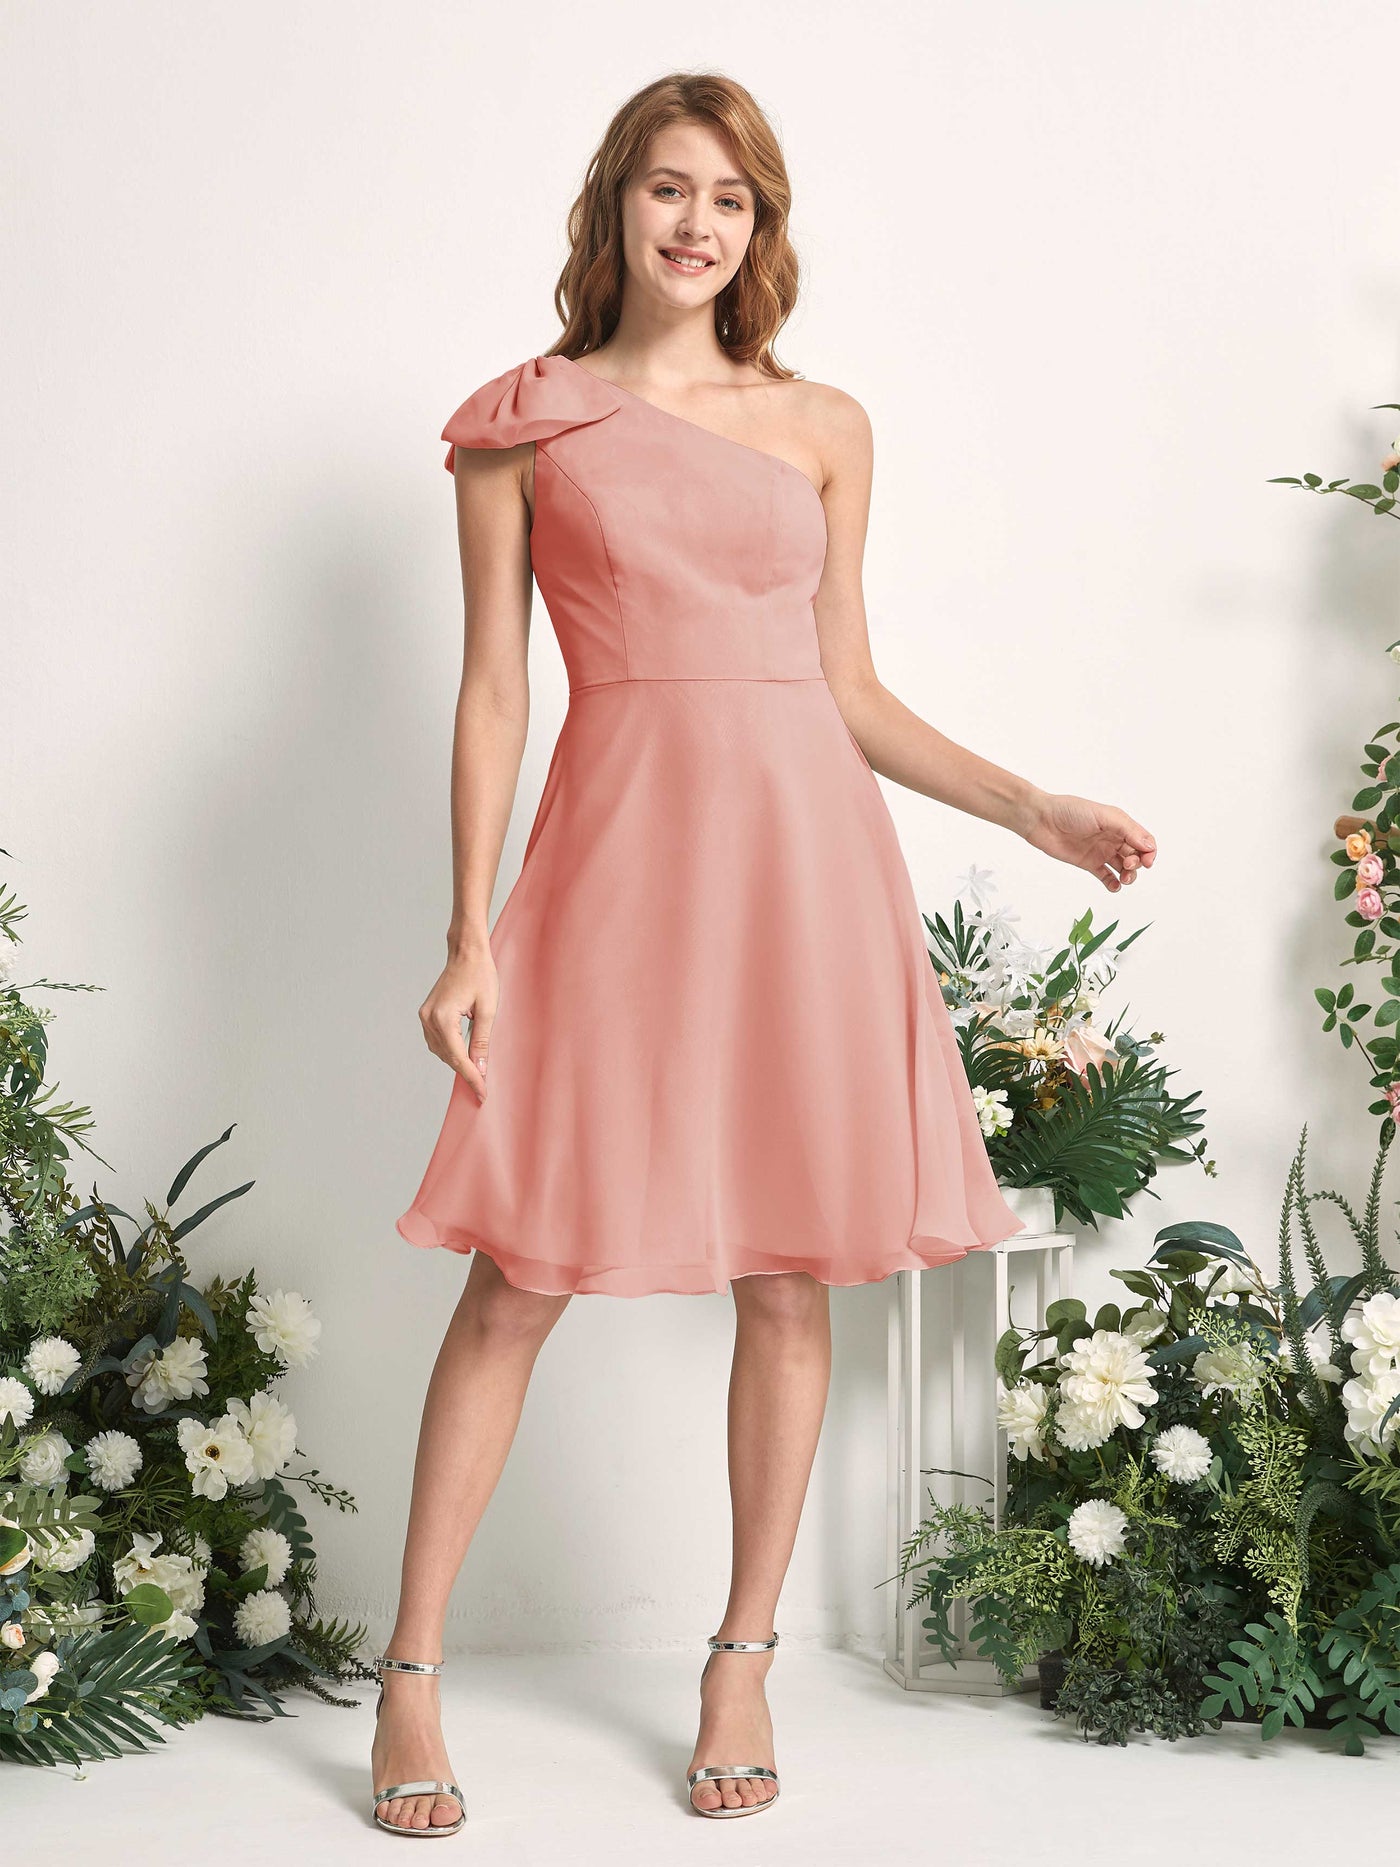 Bridesmaid Dress A-line Chiffon One Shoulder Knee Length Sleeveless Wedding Party Dress - Champagne Rose (81227006)#color_champagne-rose